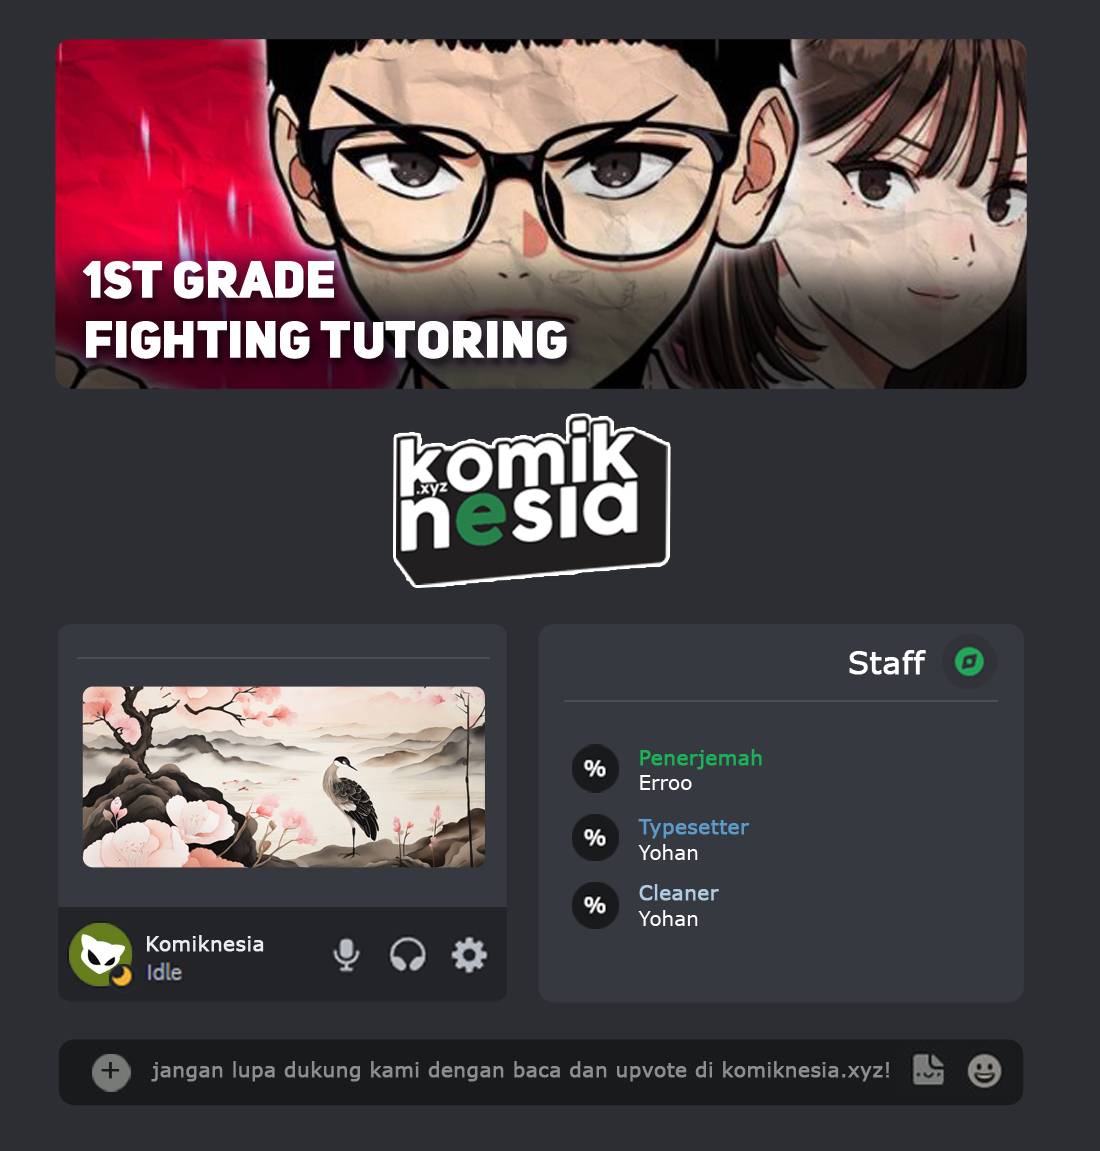 Top 1 Fighting Tutoring Chapter 11